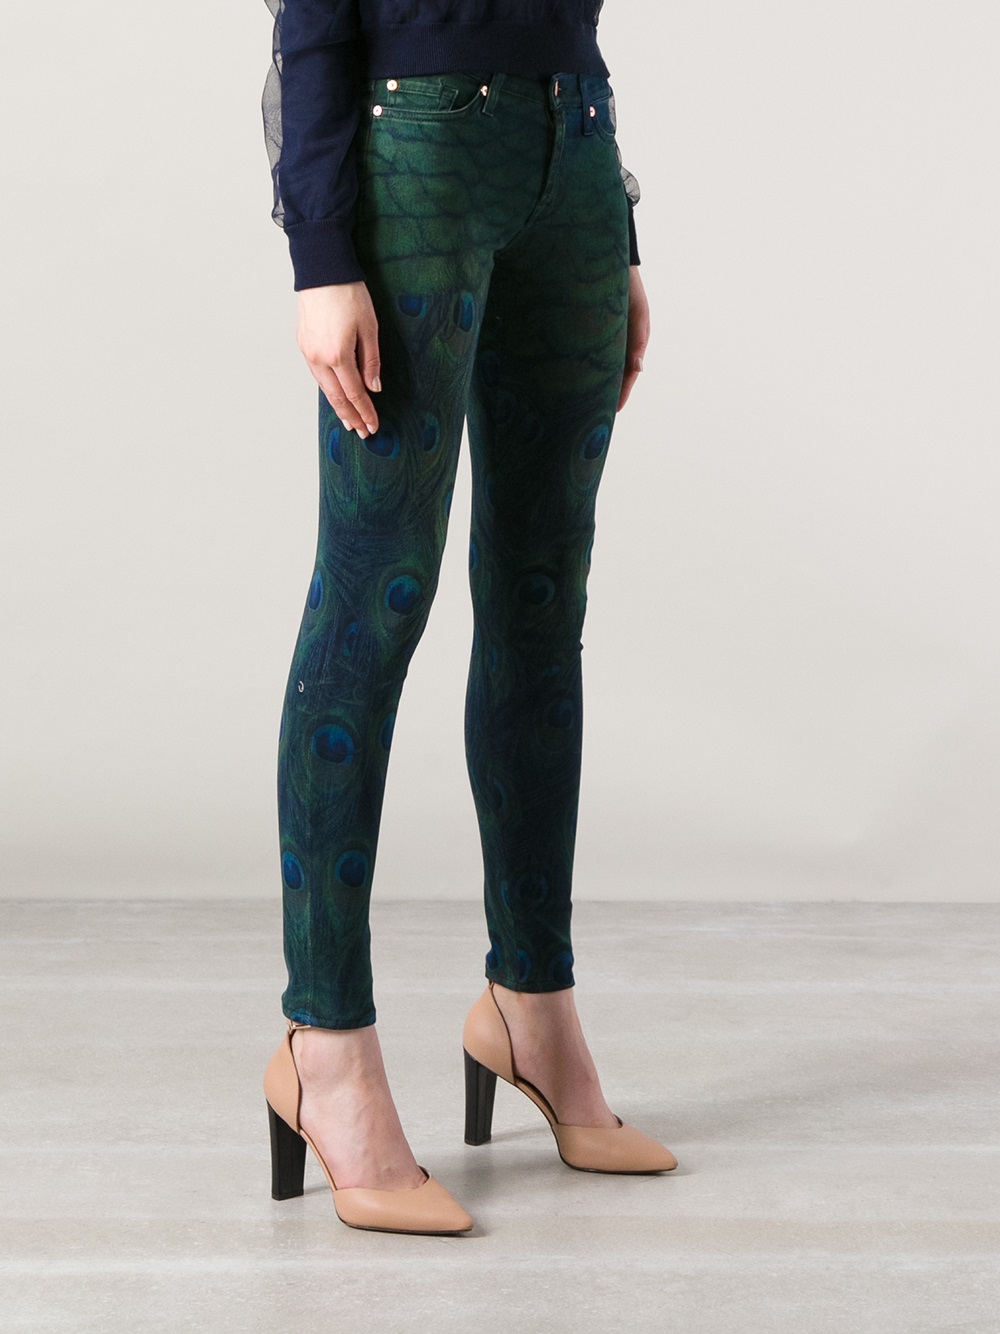 7 For All Mankind Peacock Print Skinny Jean in Blue - Lyst